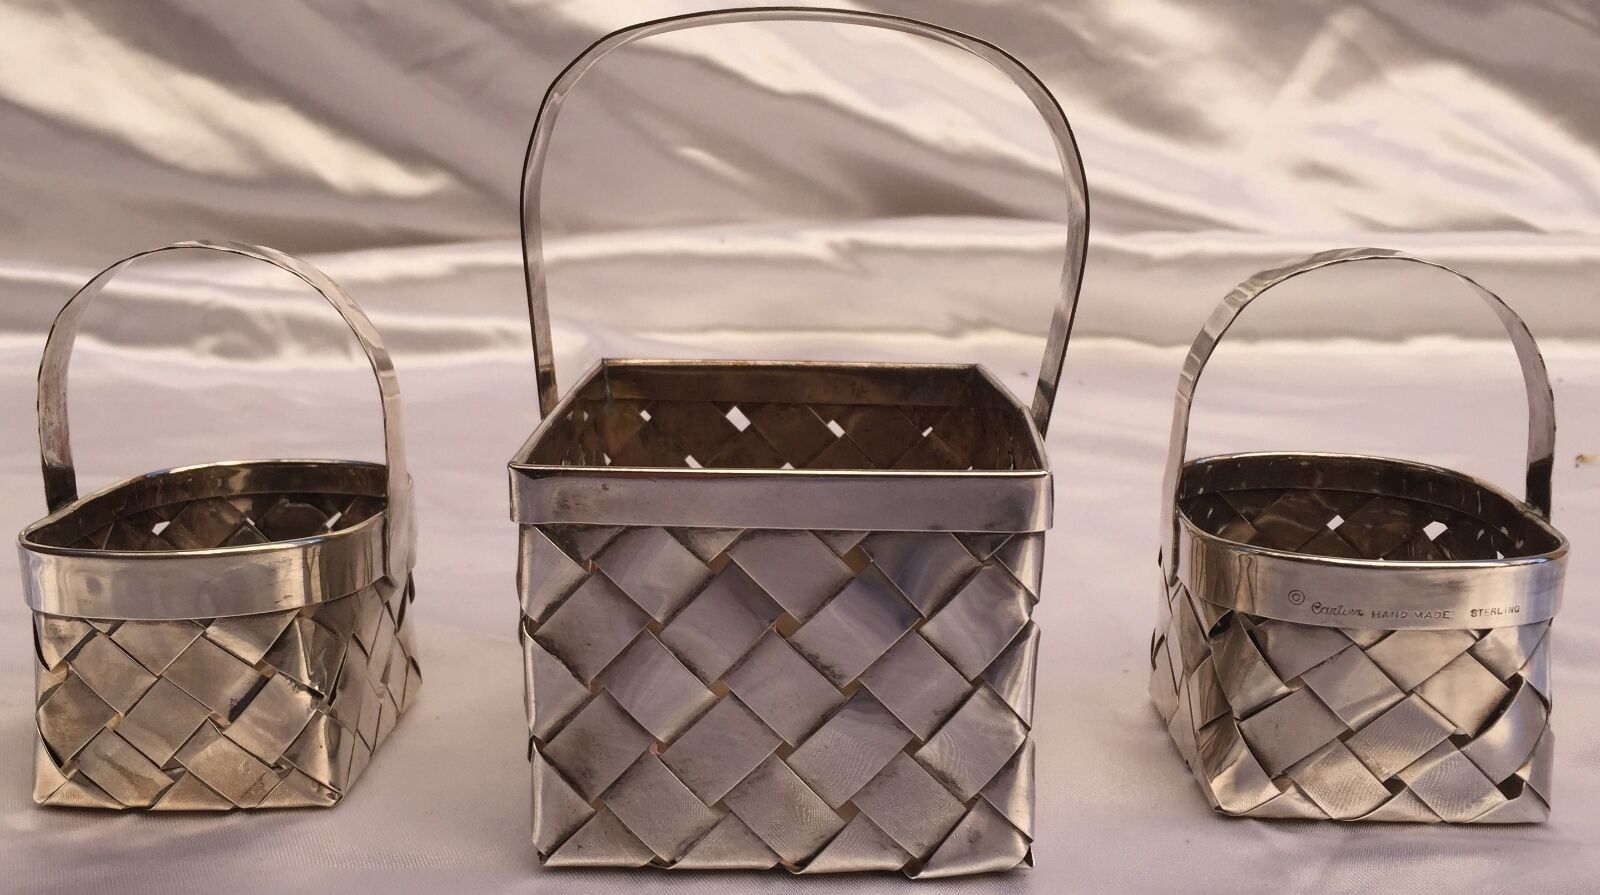 MAGNIFICENT 3 PIECE CARTIER FRENCH HAND MADE STERLING SILVER BASKETS \